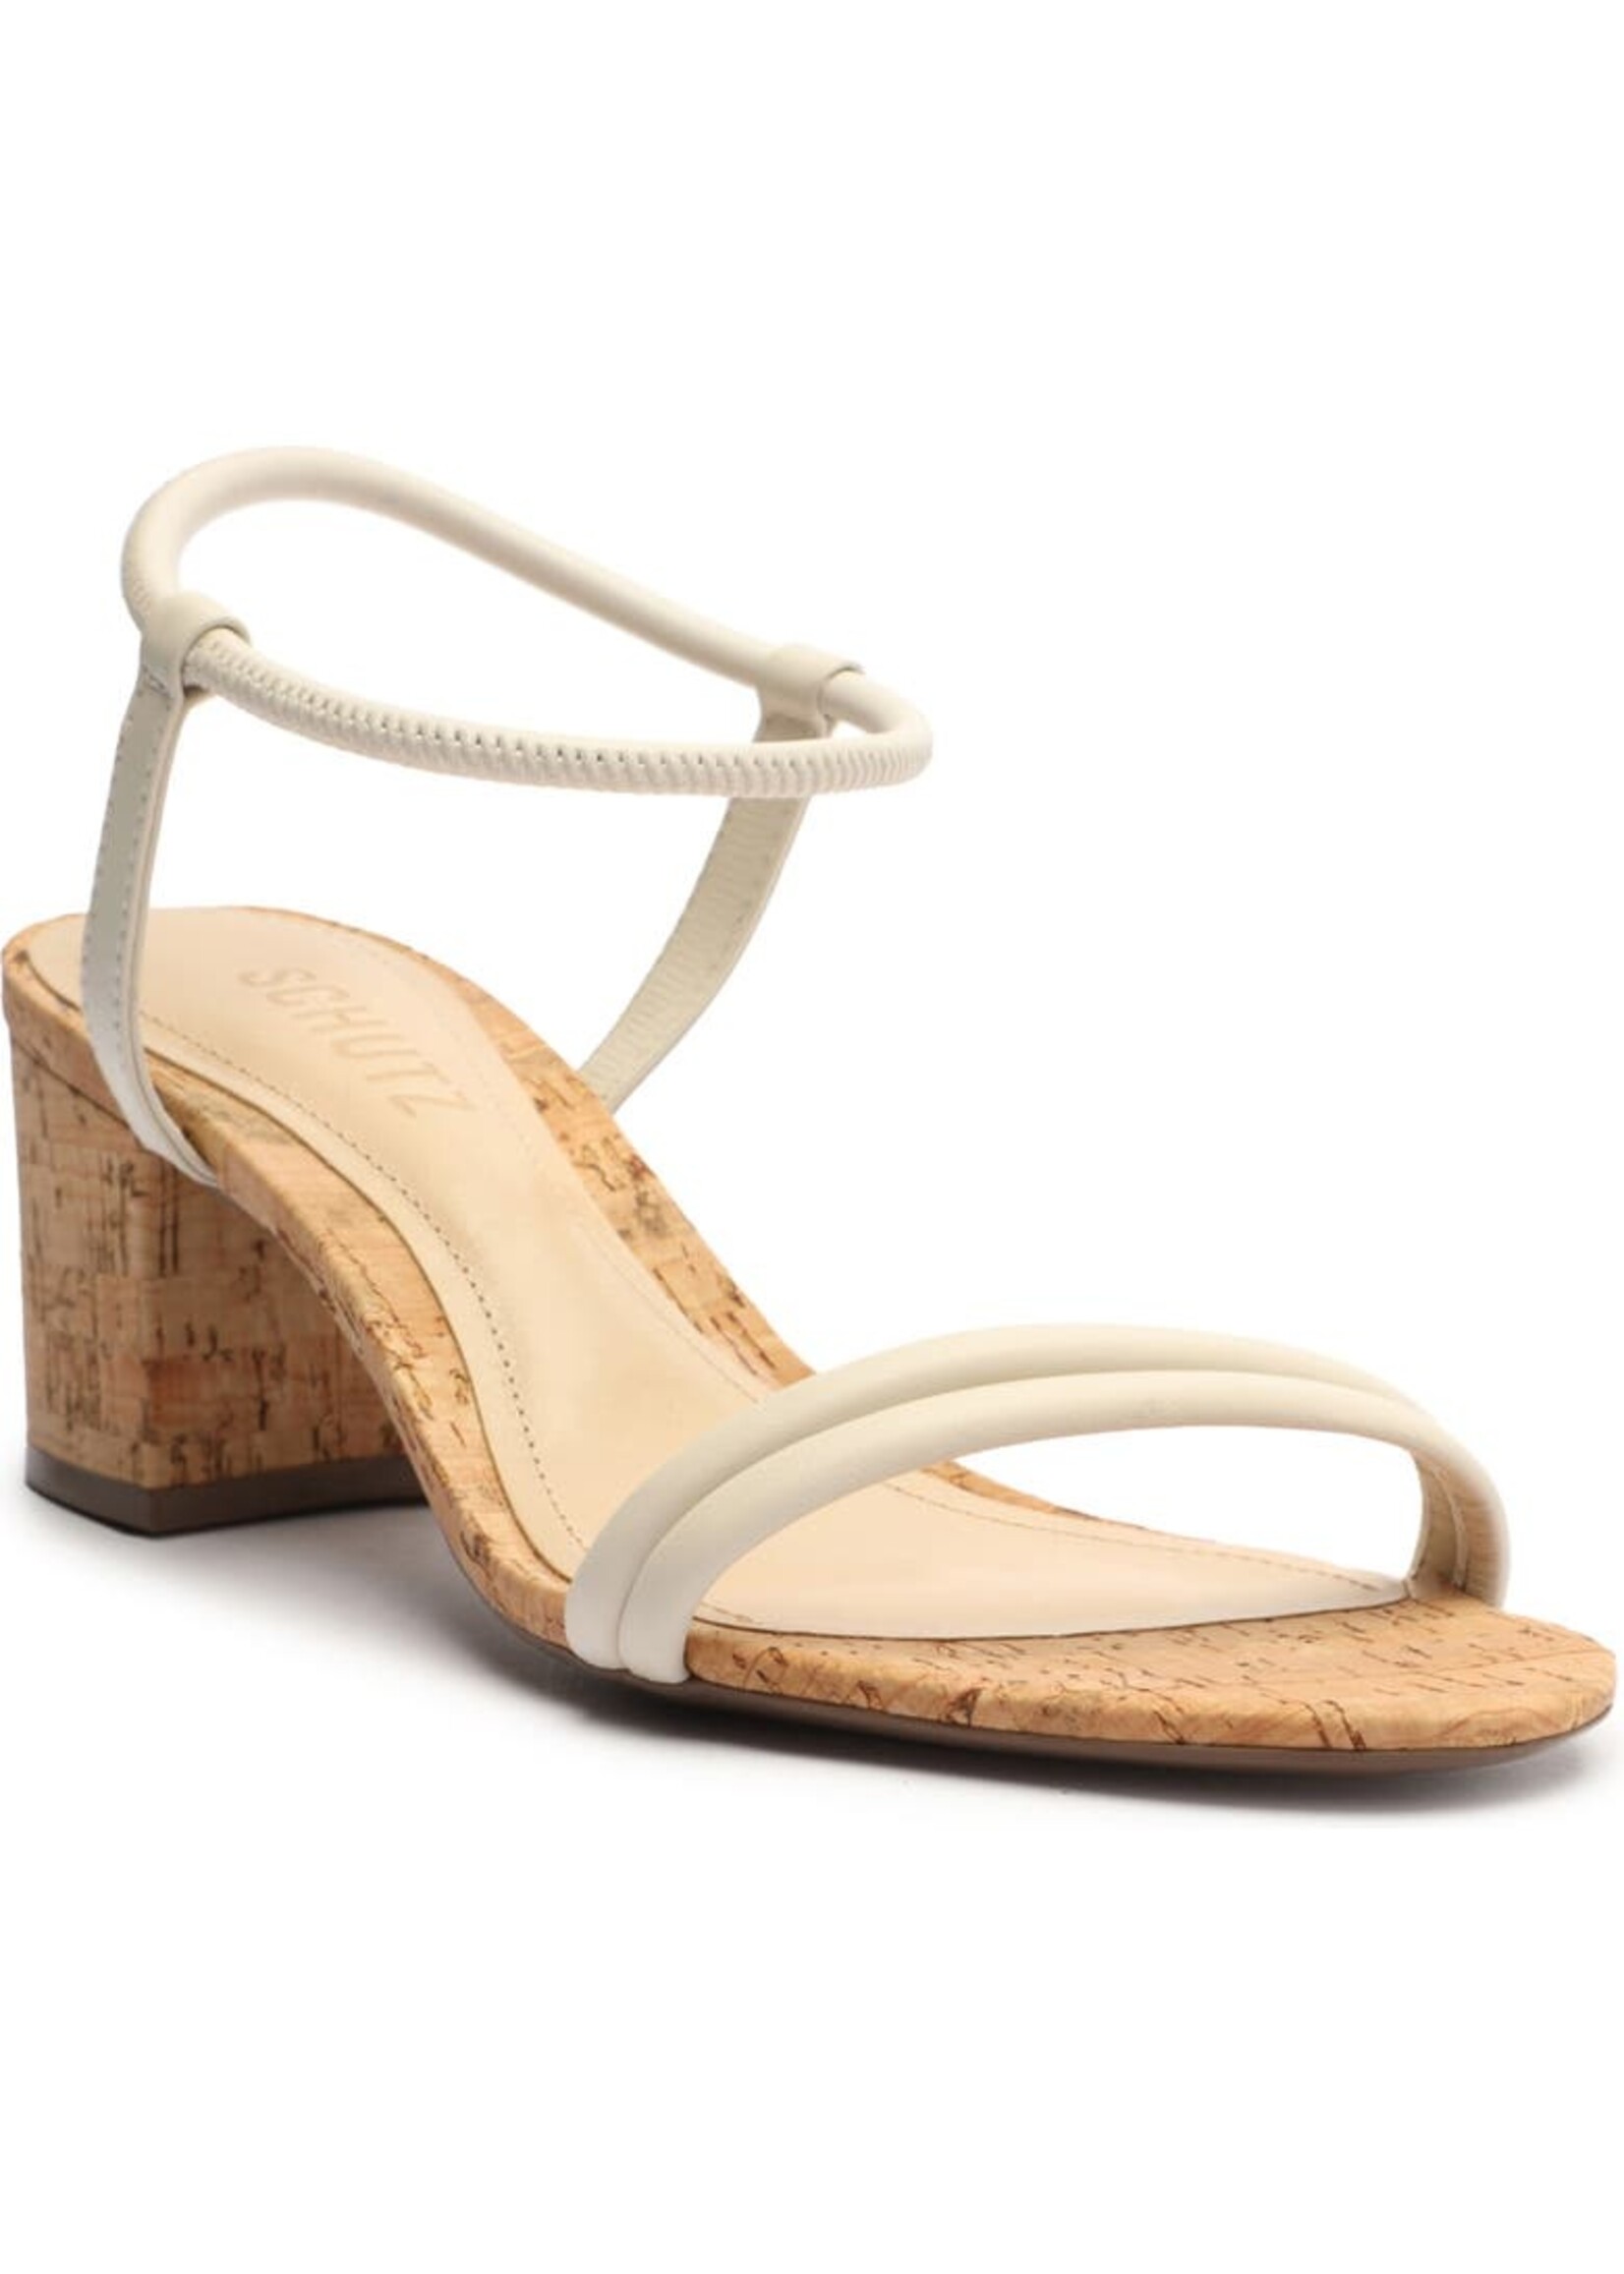 Schutz Giminez Mid Leather Sandal in Pearl by Schutz